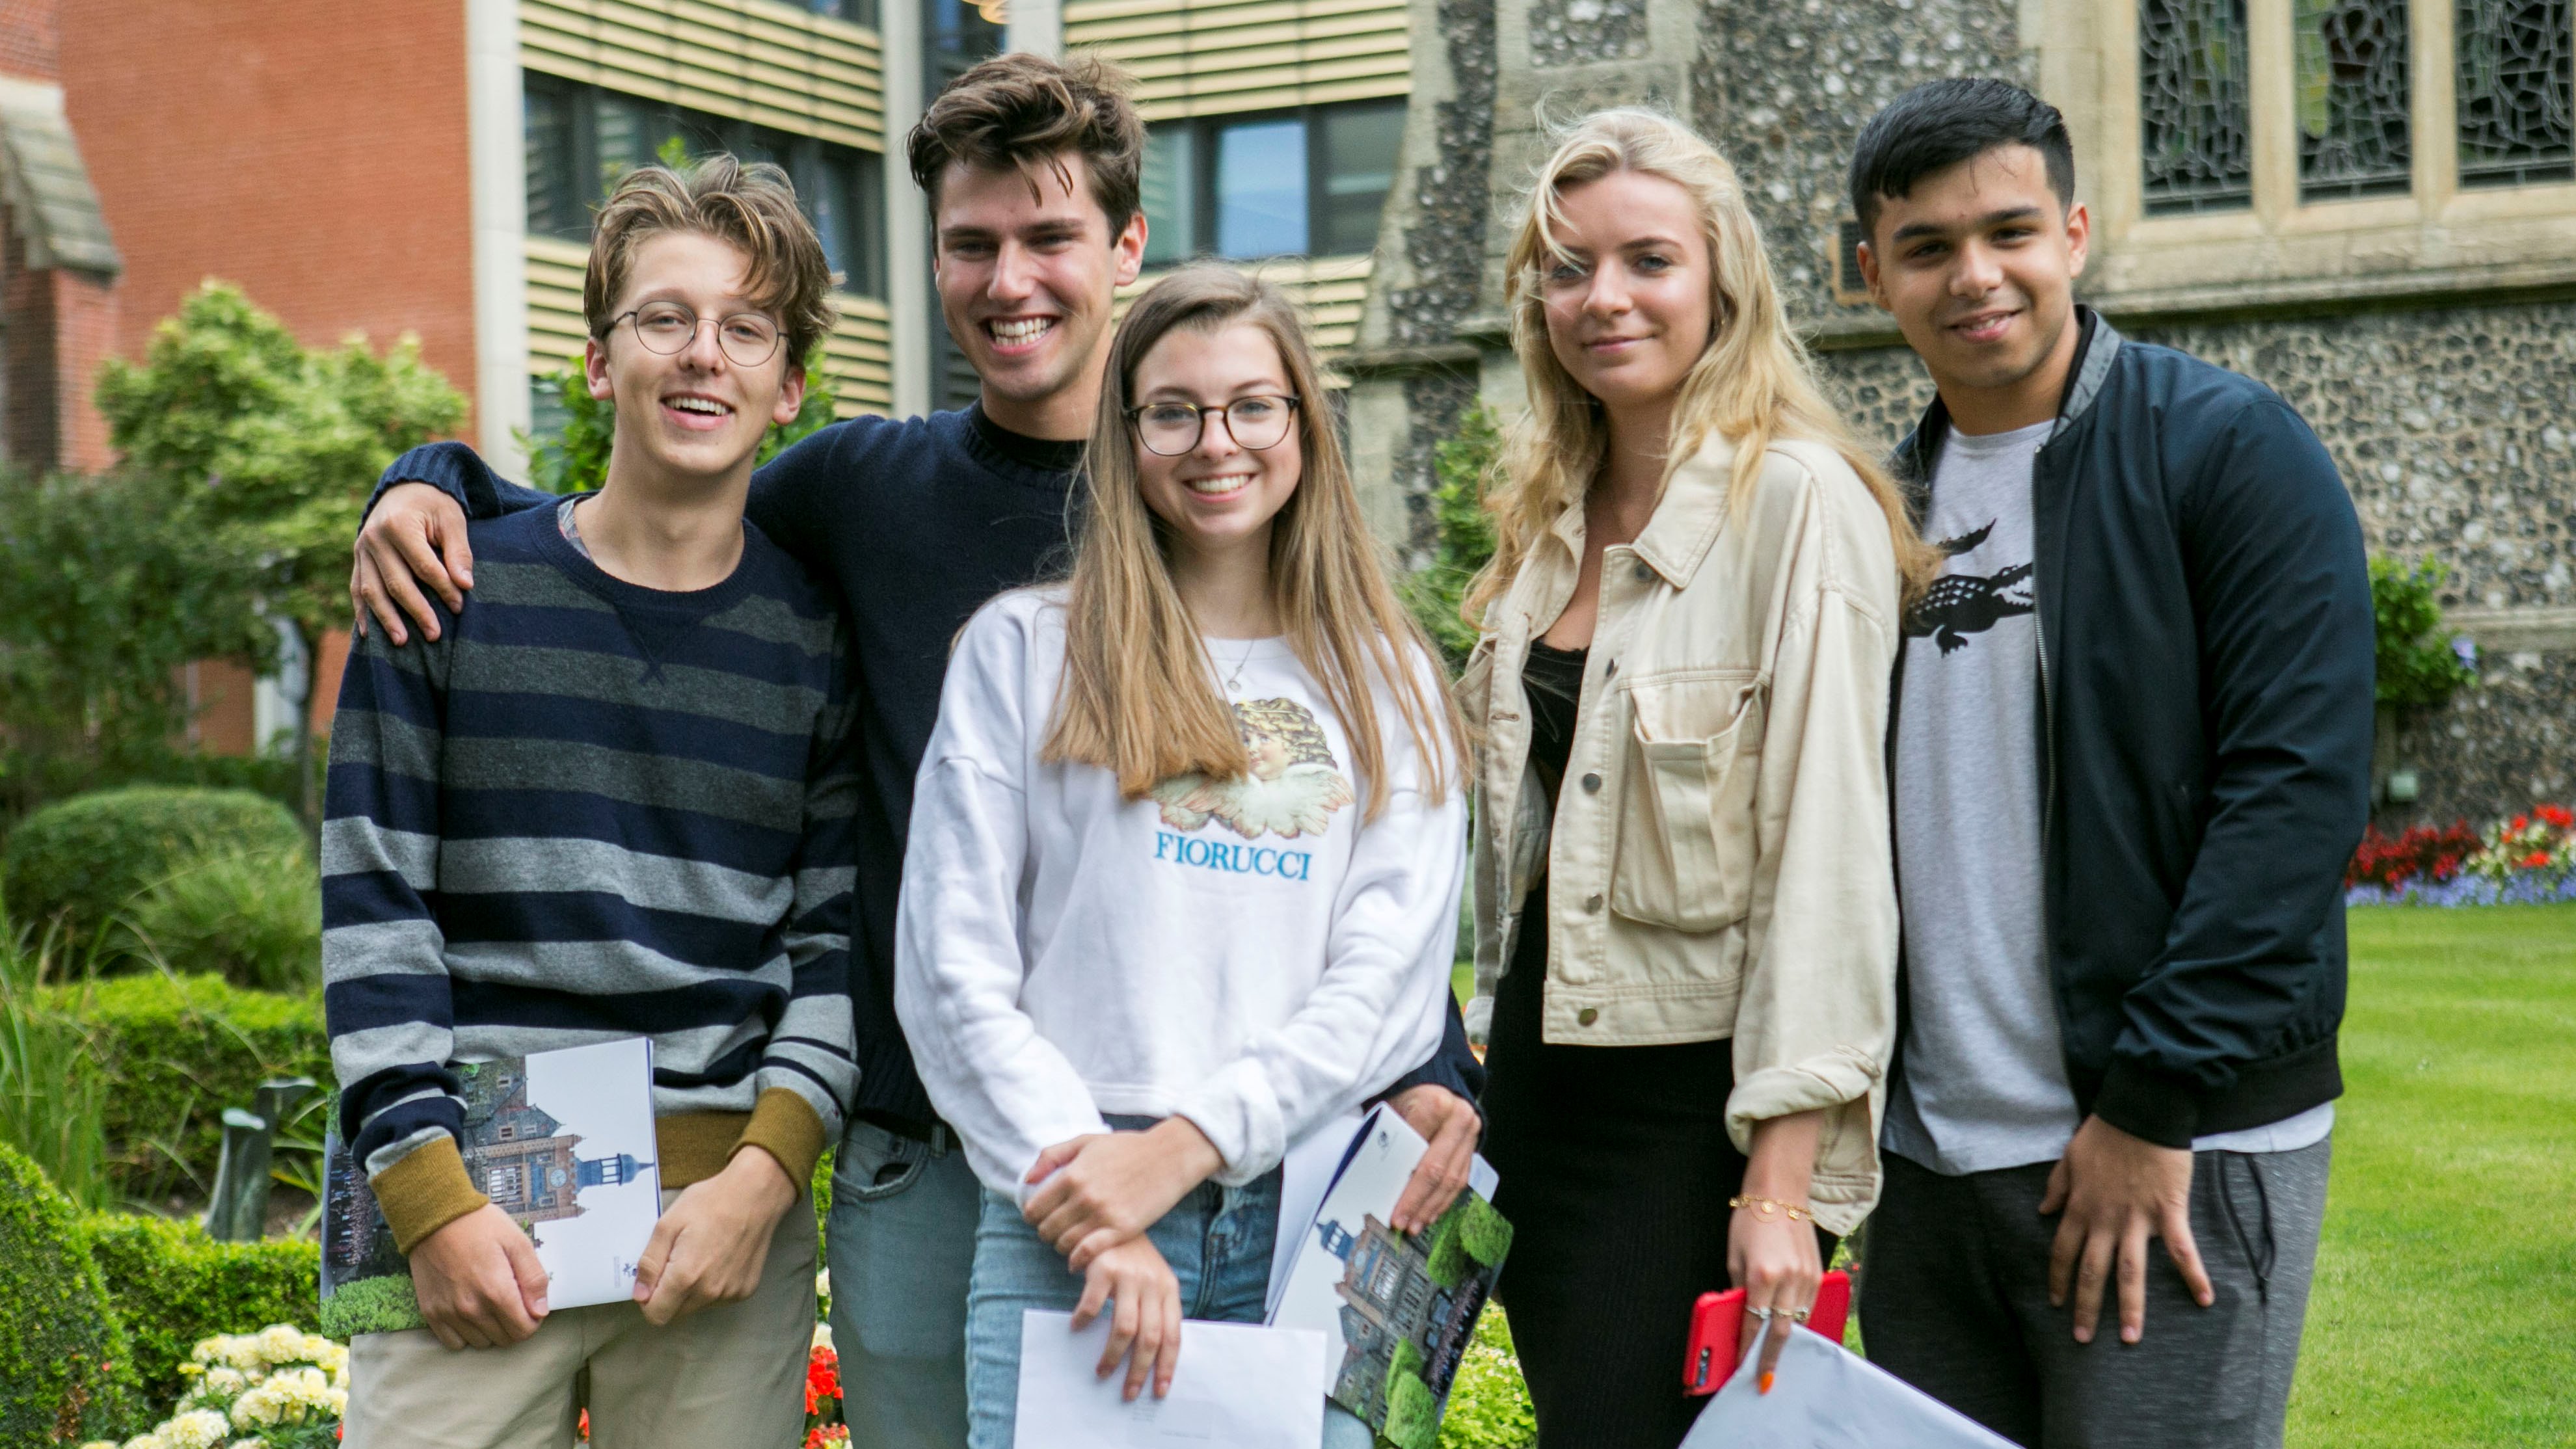 A-level results 2019 cropped (10).jpg